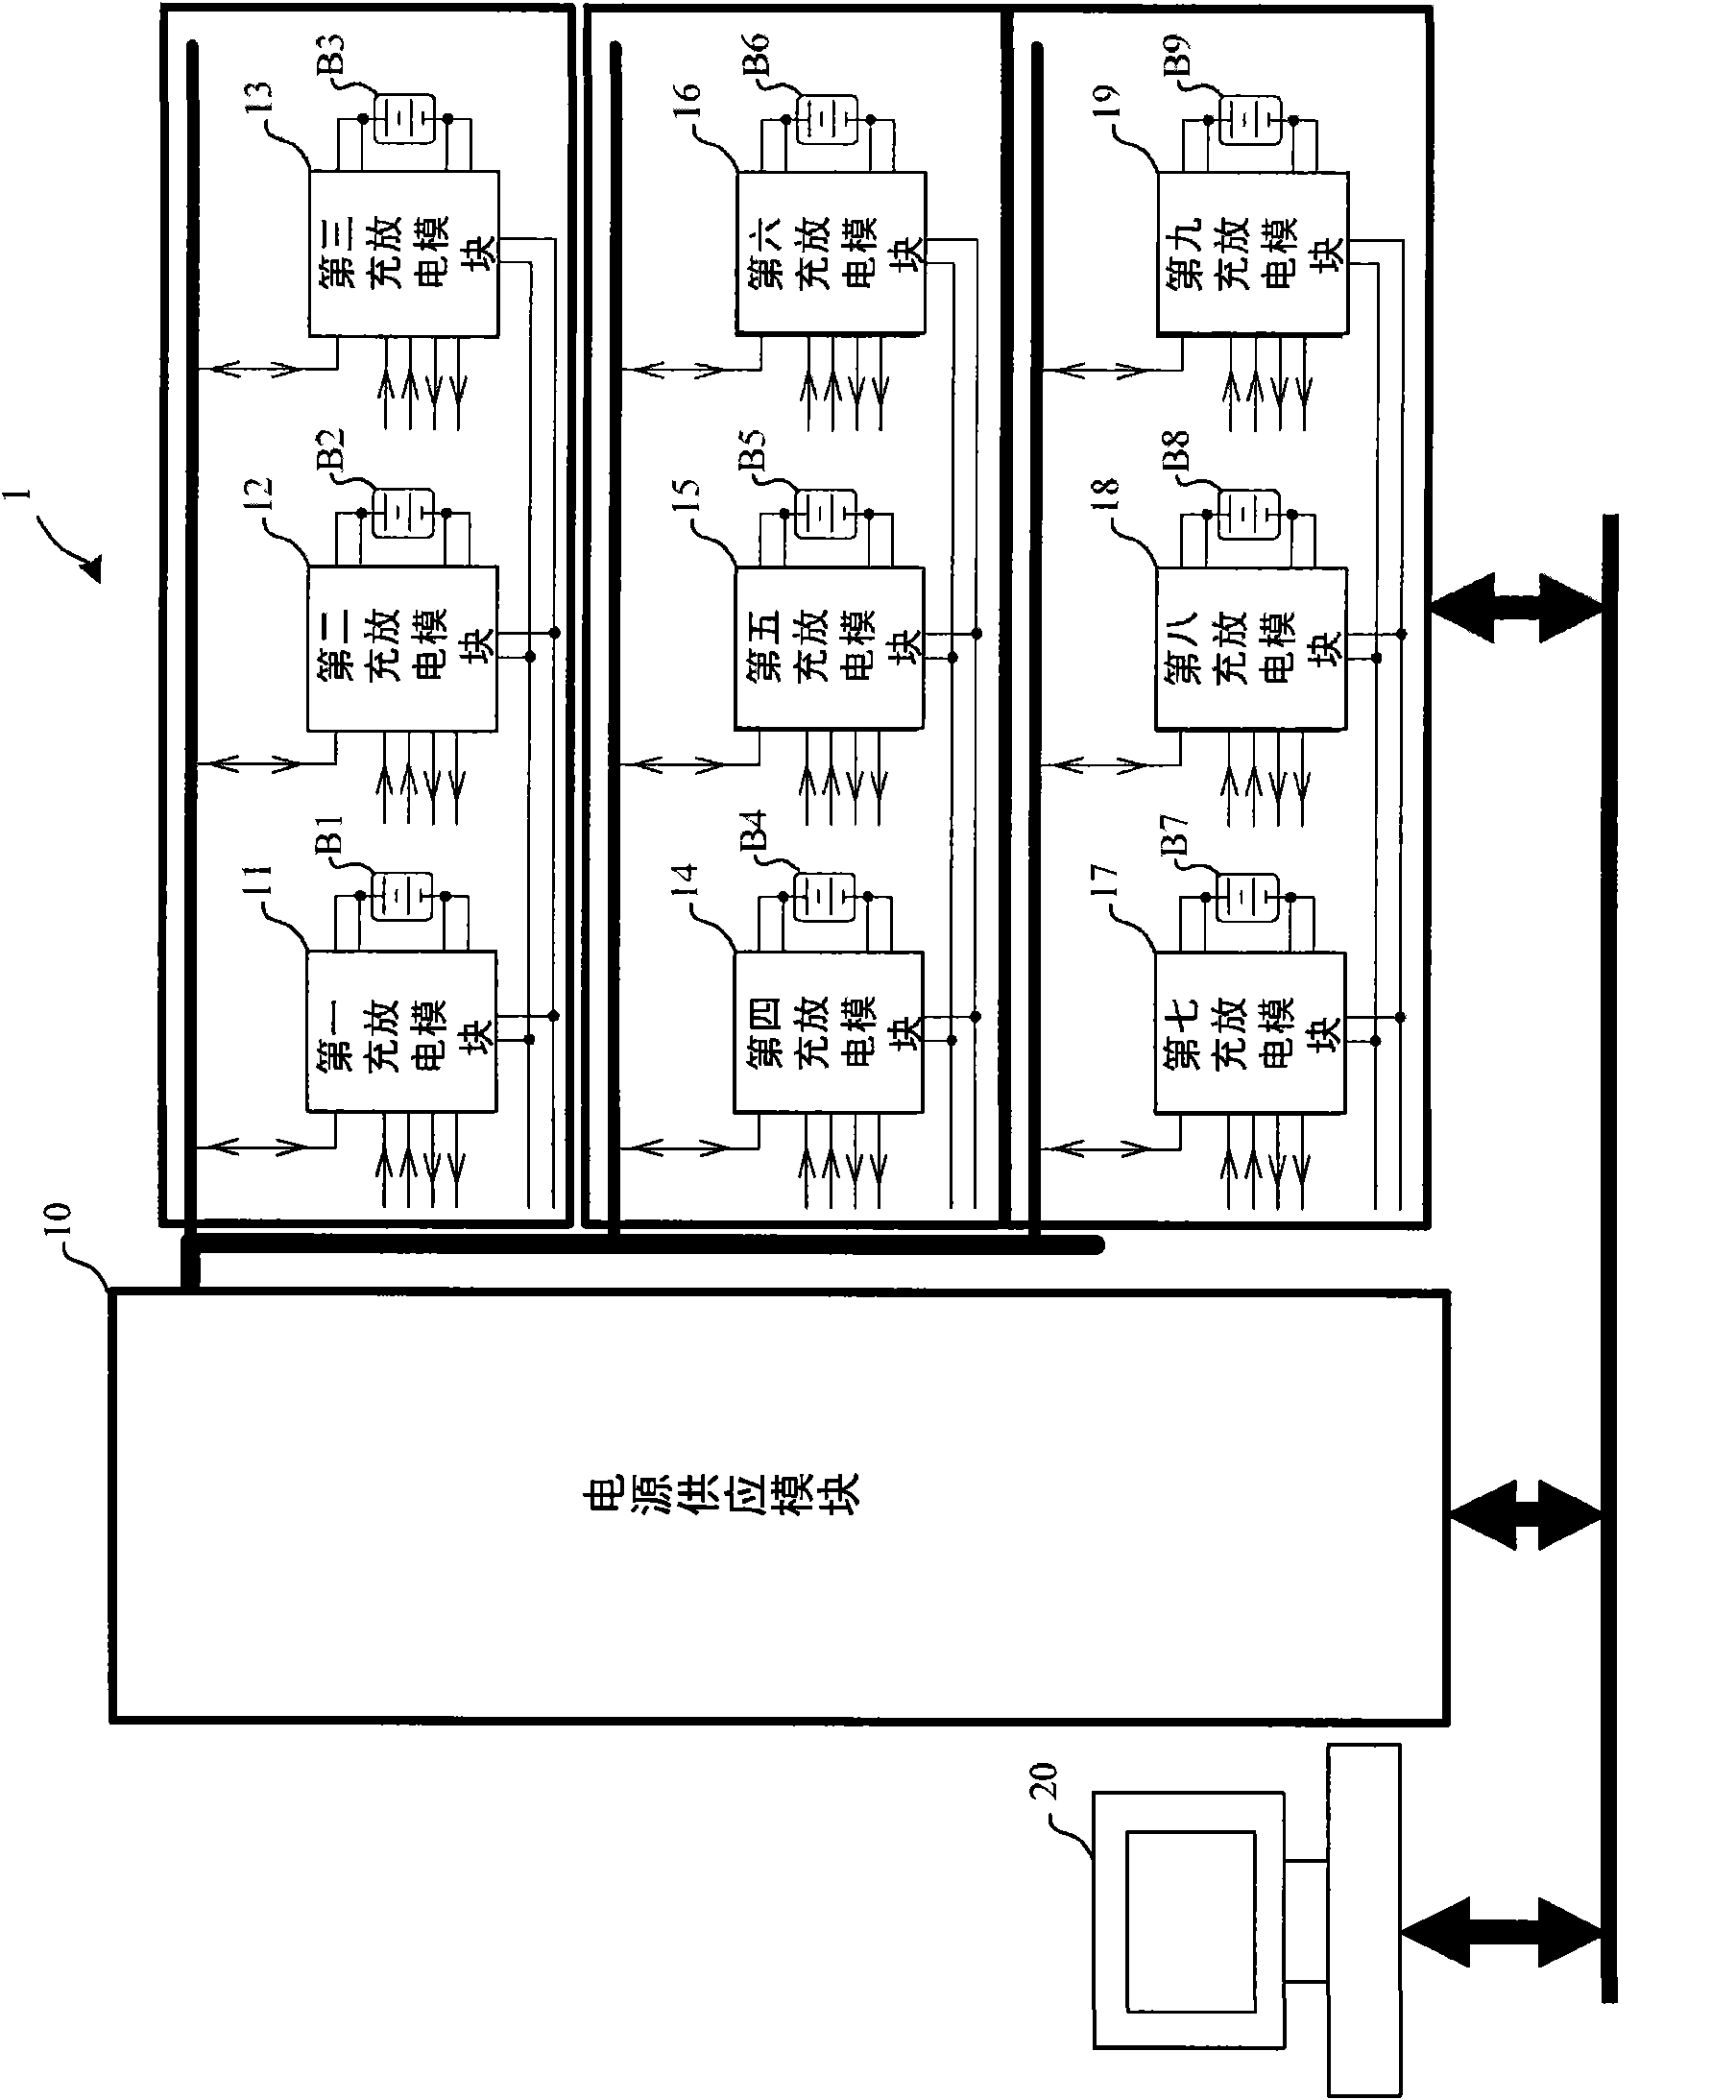 Cell charge-discharge device, charge-discharge modules and method for charging-discharging cell